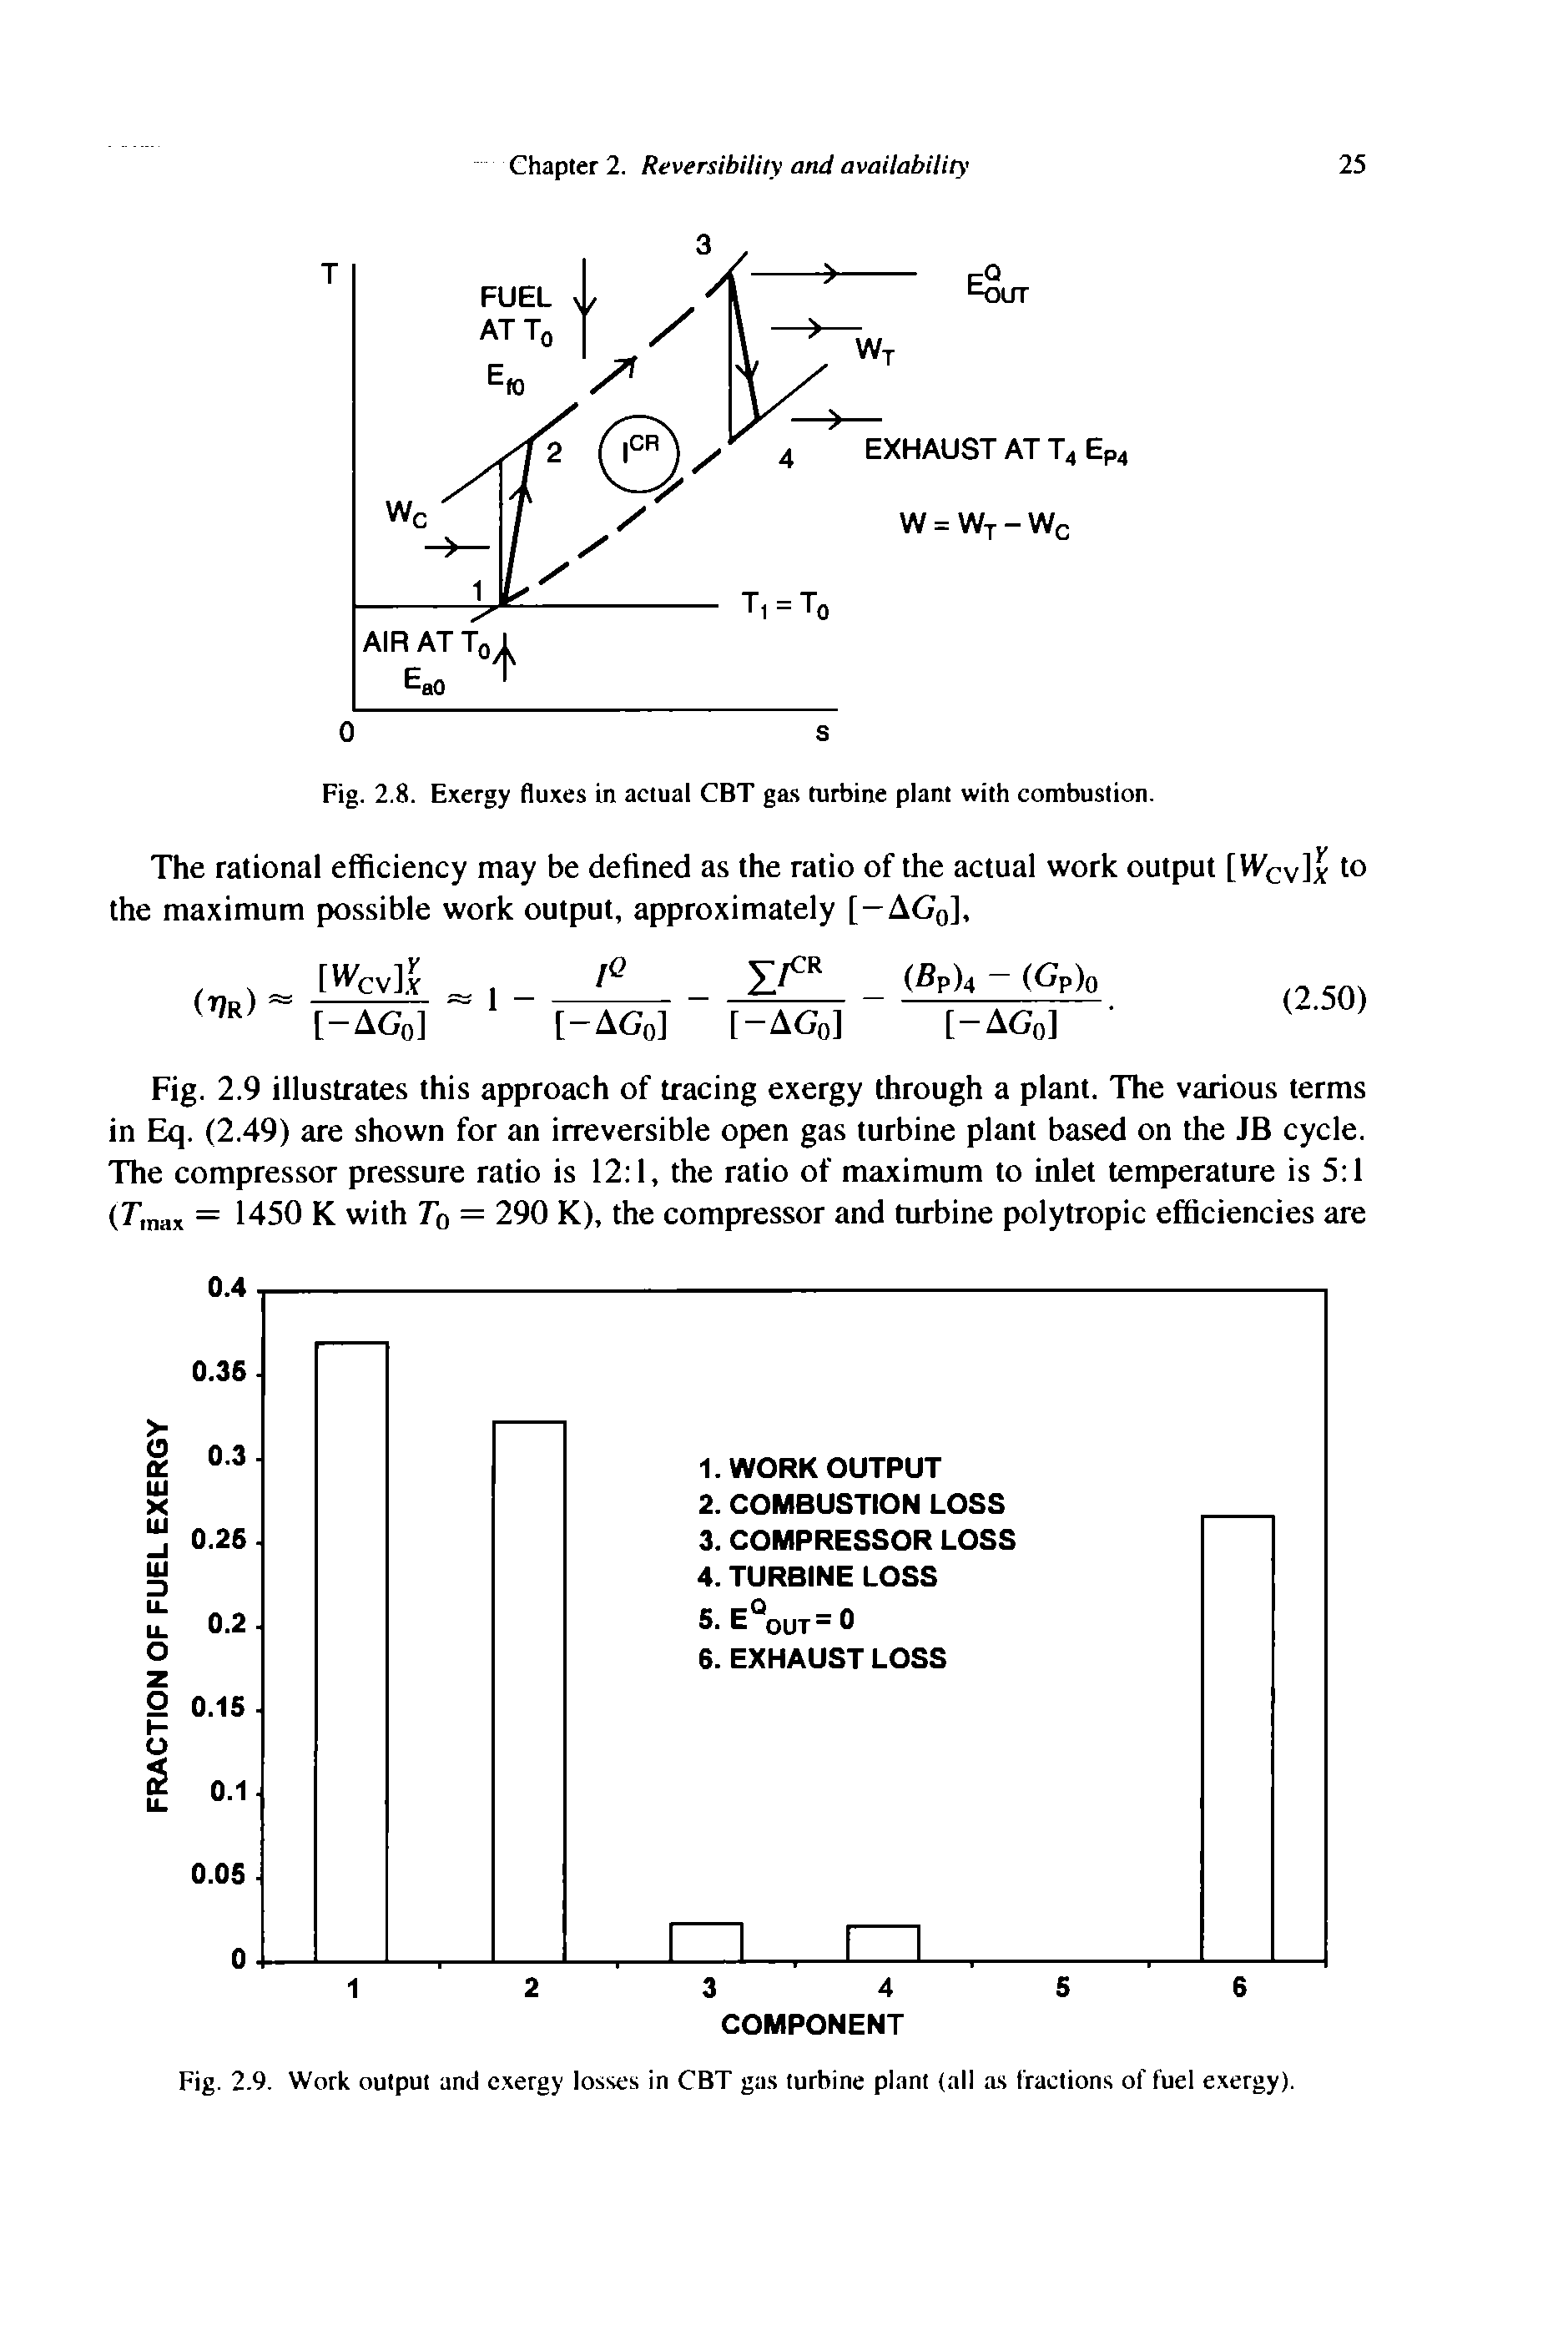 Fig. 2.9. Work output and exergy losses in CBT ga.s turbine plant (all. as I ractions of fuel exergy).